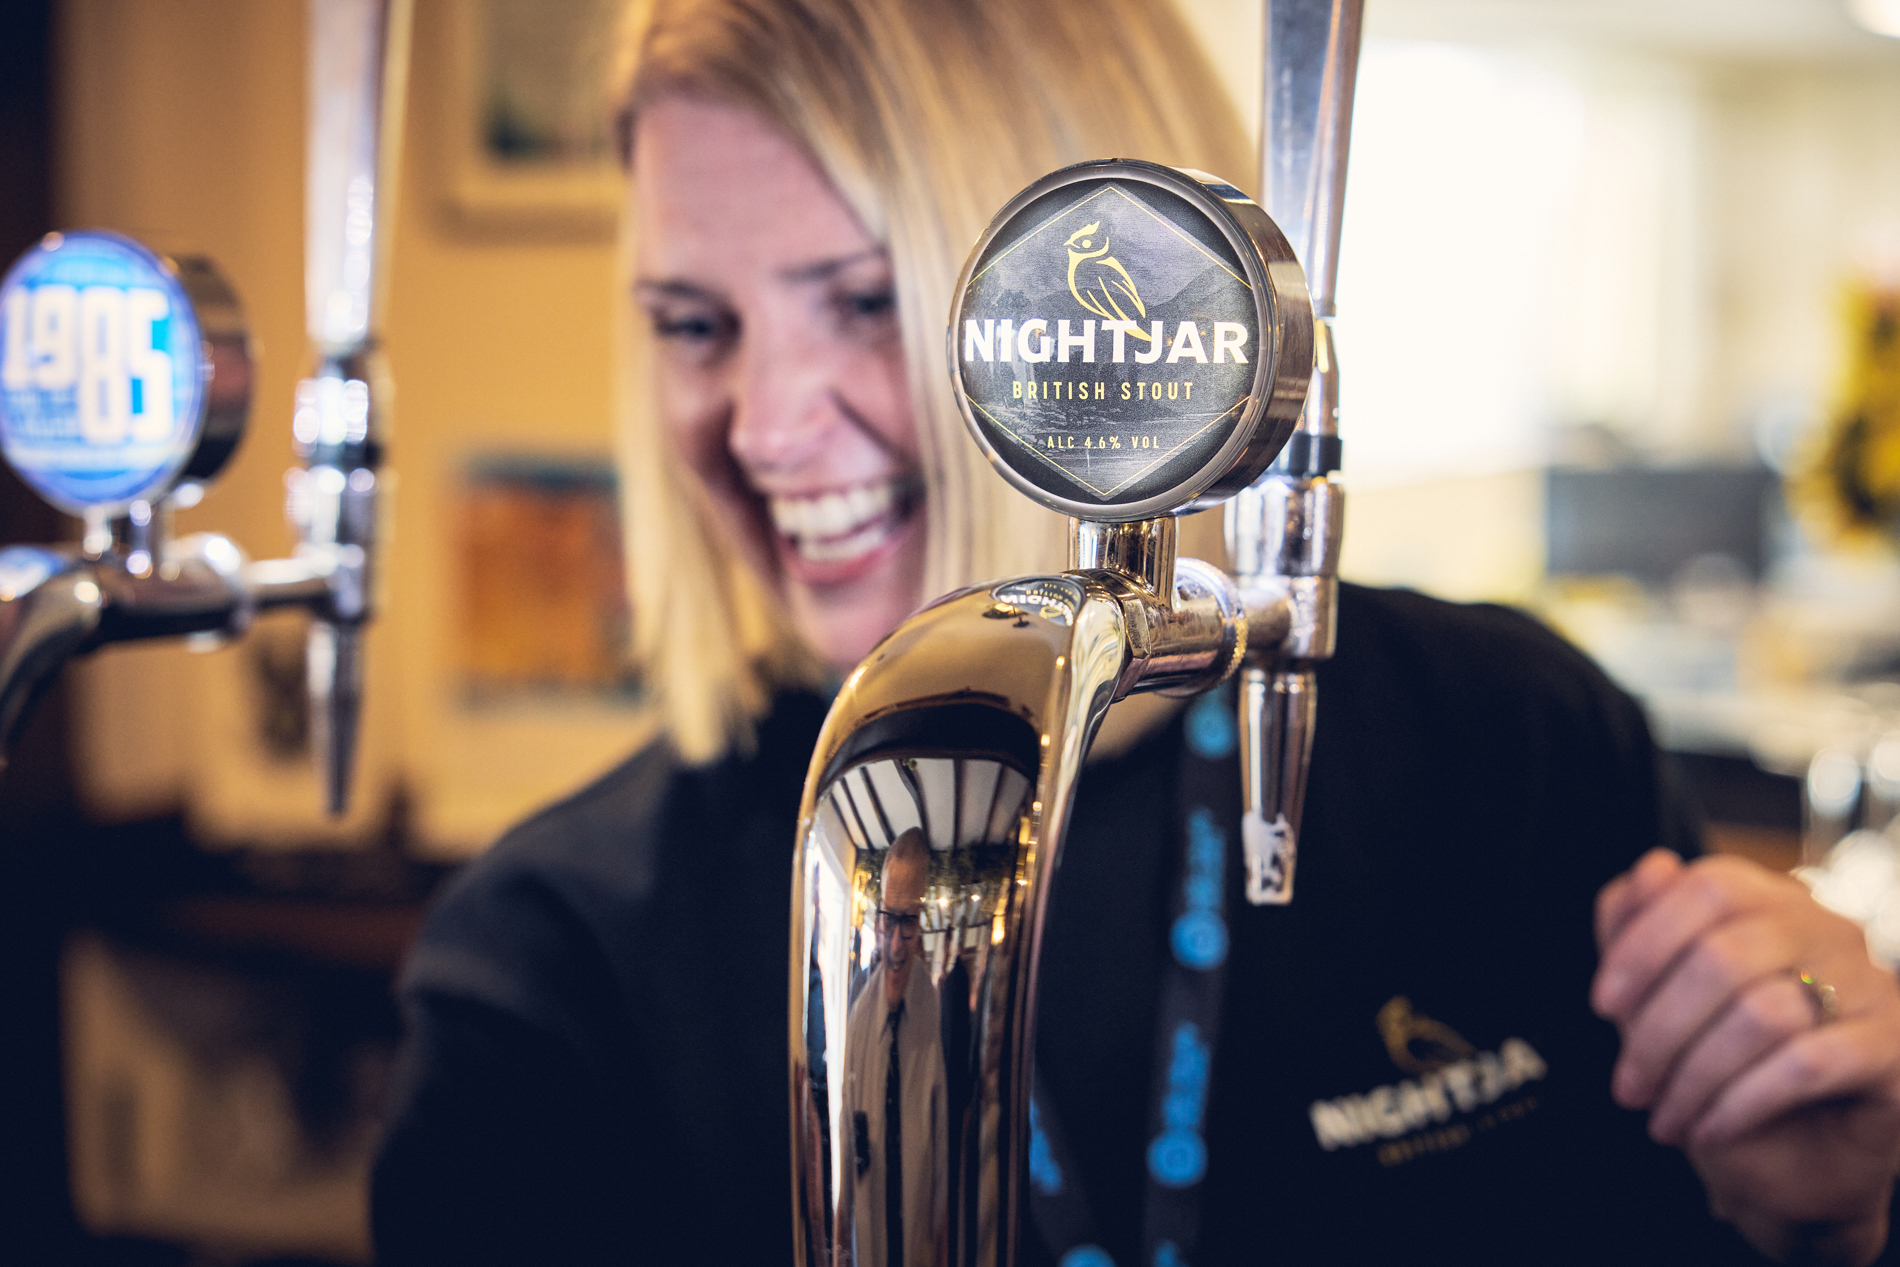  Nightjar was launched on Thursday, September 22, to 250 publicans at the brewery in Stoke Lacy. Picture: Photopia Photography